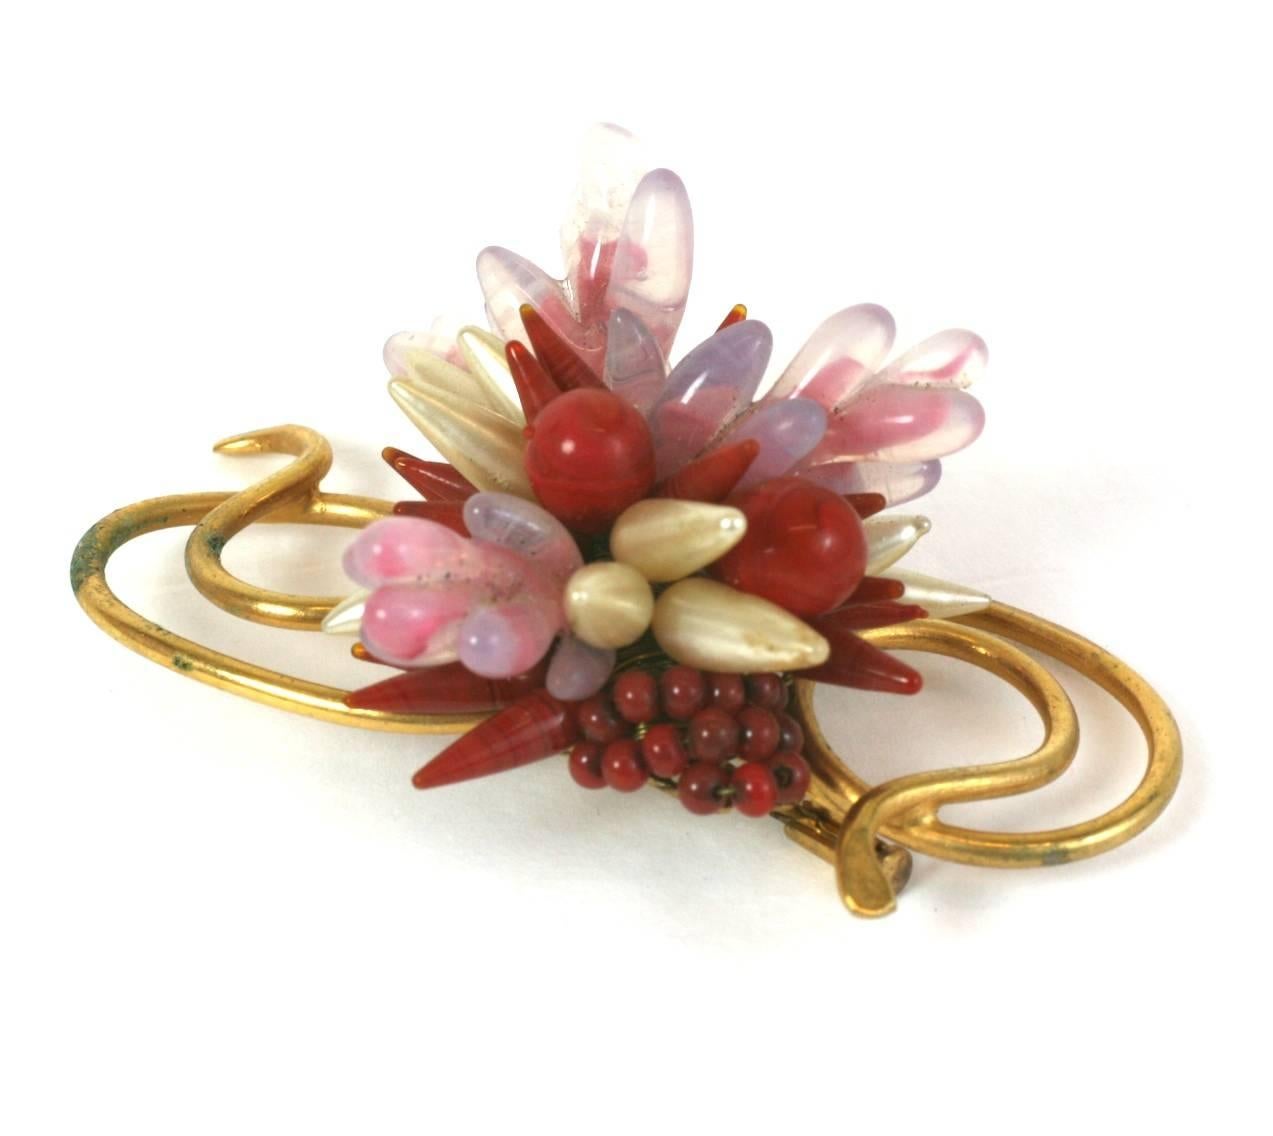 Ruby and Pink Pate de Verre Brooch by Louis Rousselet. Handmade poured glass petals in various forms and colors are wired onto a backing to form the central cluster. Gilt wire work emanates from the center. 2.75